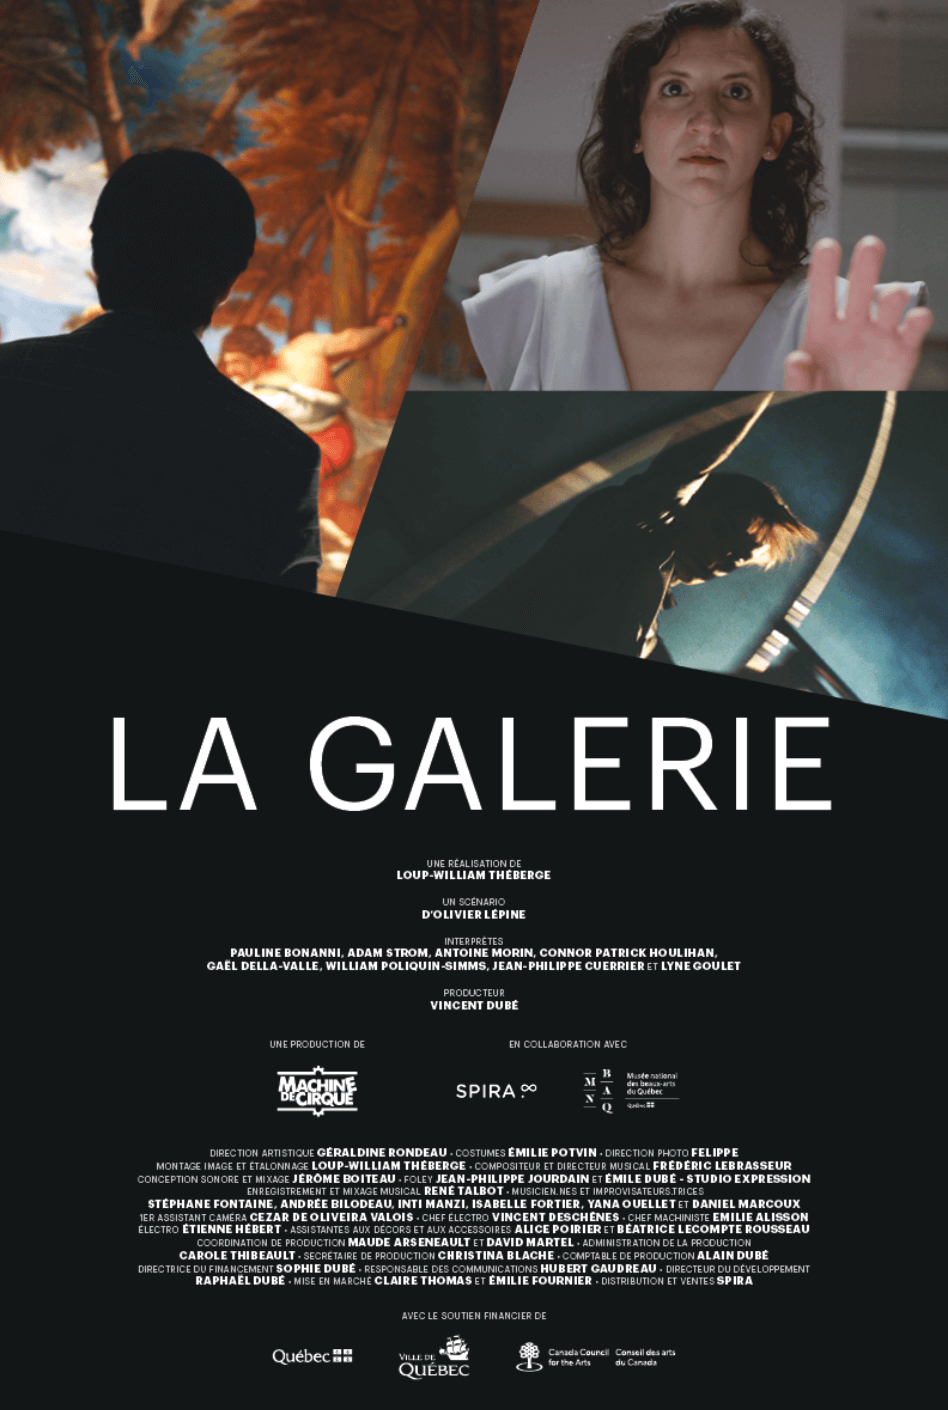 images/bottin_films/2d5a1e235993b5f1394513b38c2fbf39-La-Galerie-affiche-poster.png#joomlaImage://local-images/bottin_films/2d5a1e235993b5f1394513b38c2fbf39-La-Galerie-affiche-poster.png?width=948&height=1410